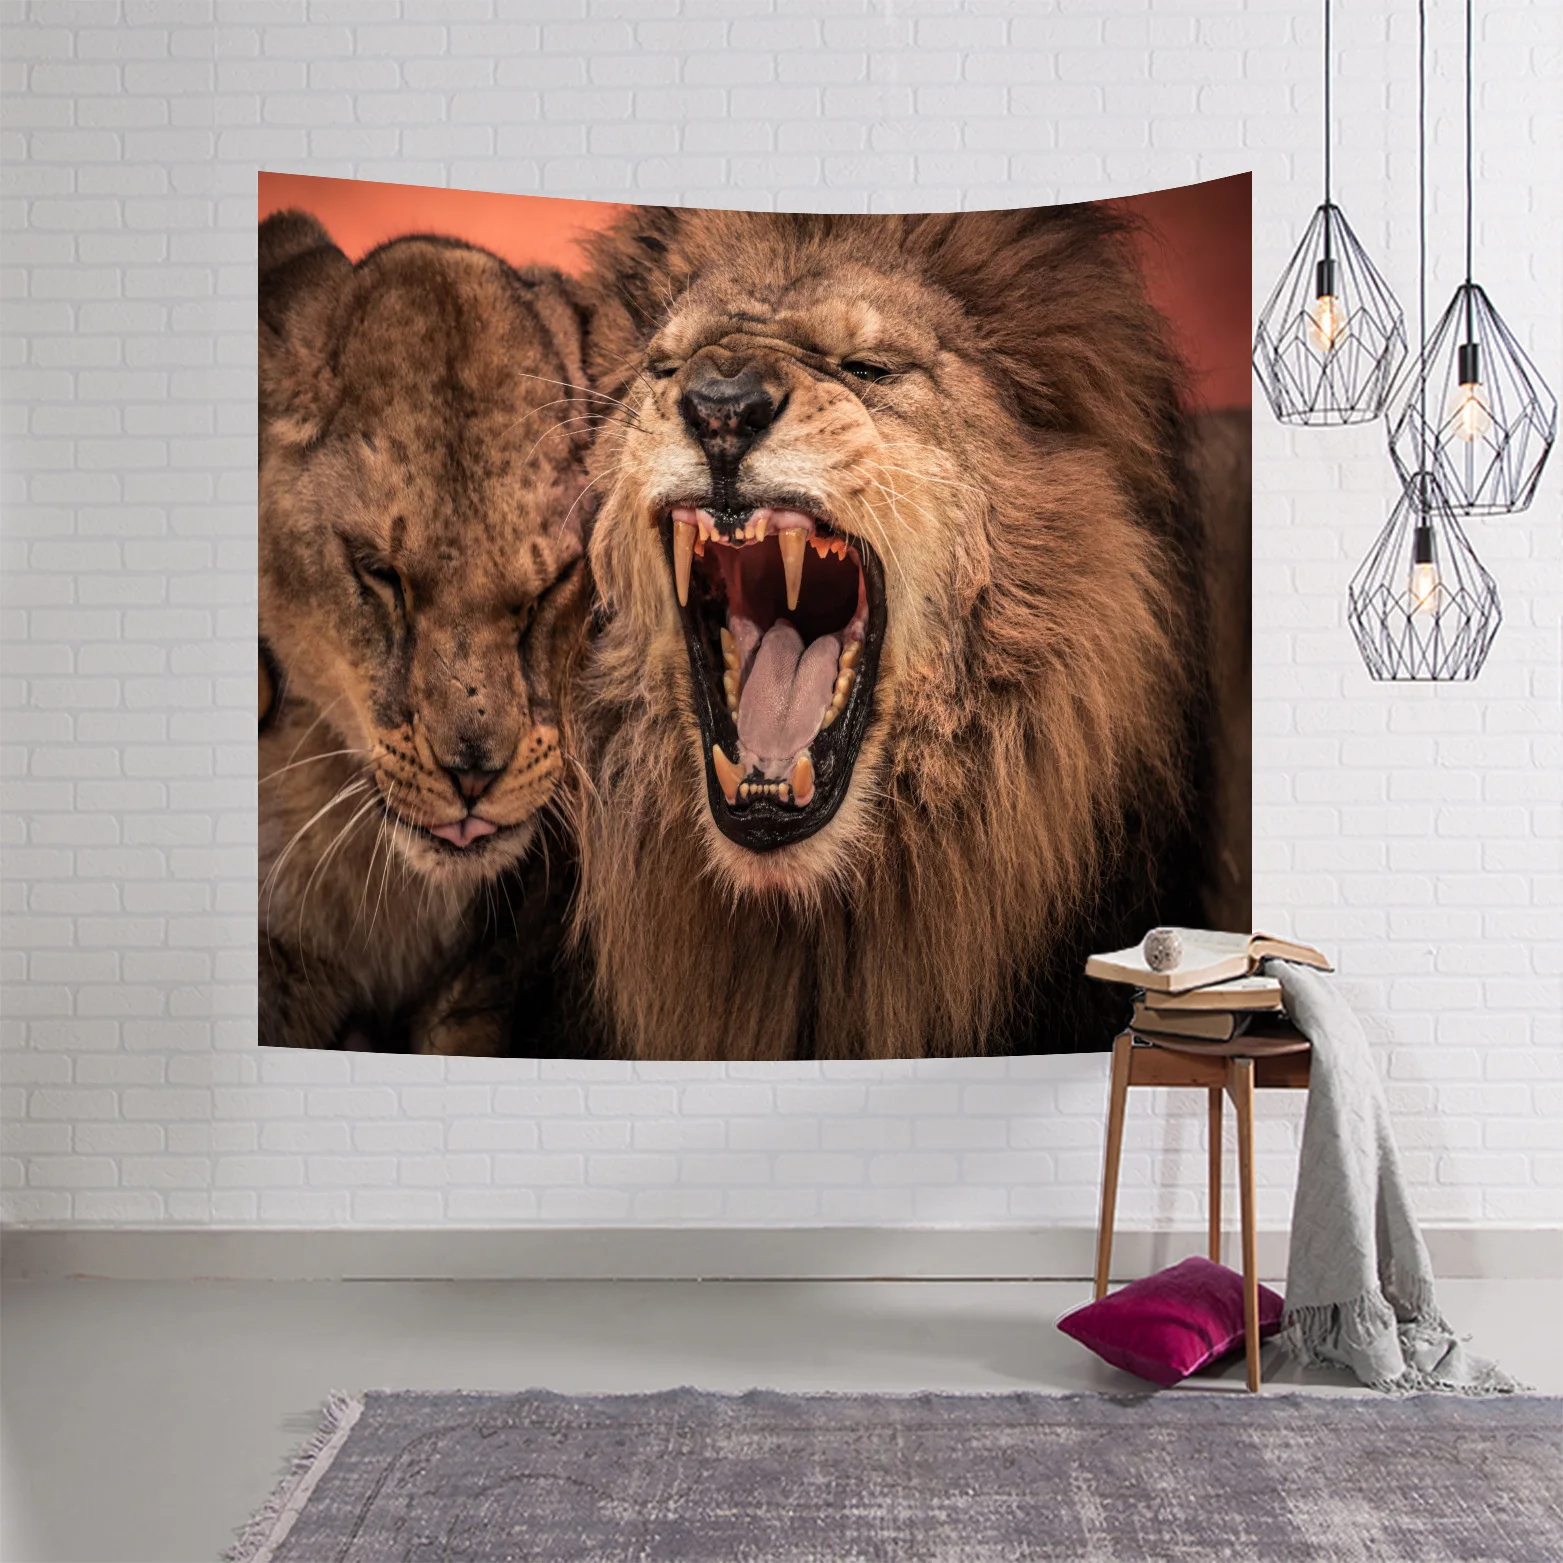 

Animal Lion Tiger Tapestry Wall Hanging Animal Twin Hippie Tapestry Blue Boho Hippy Bohemian Dorm Decor Multiple Sizes Bedspread